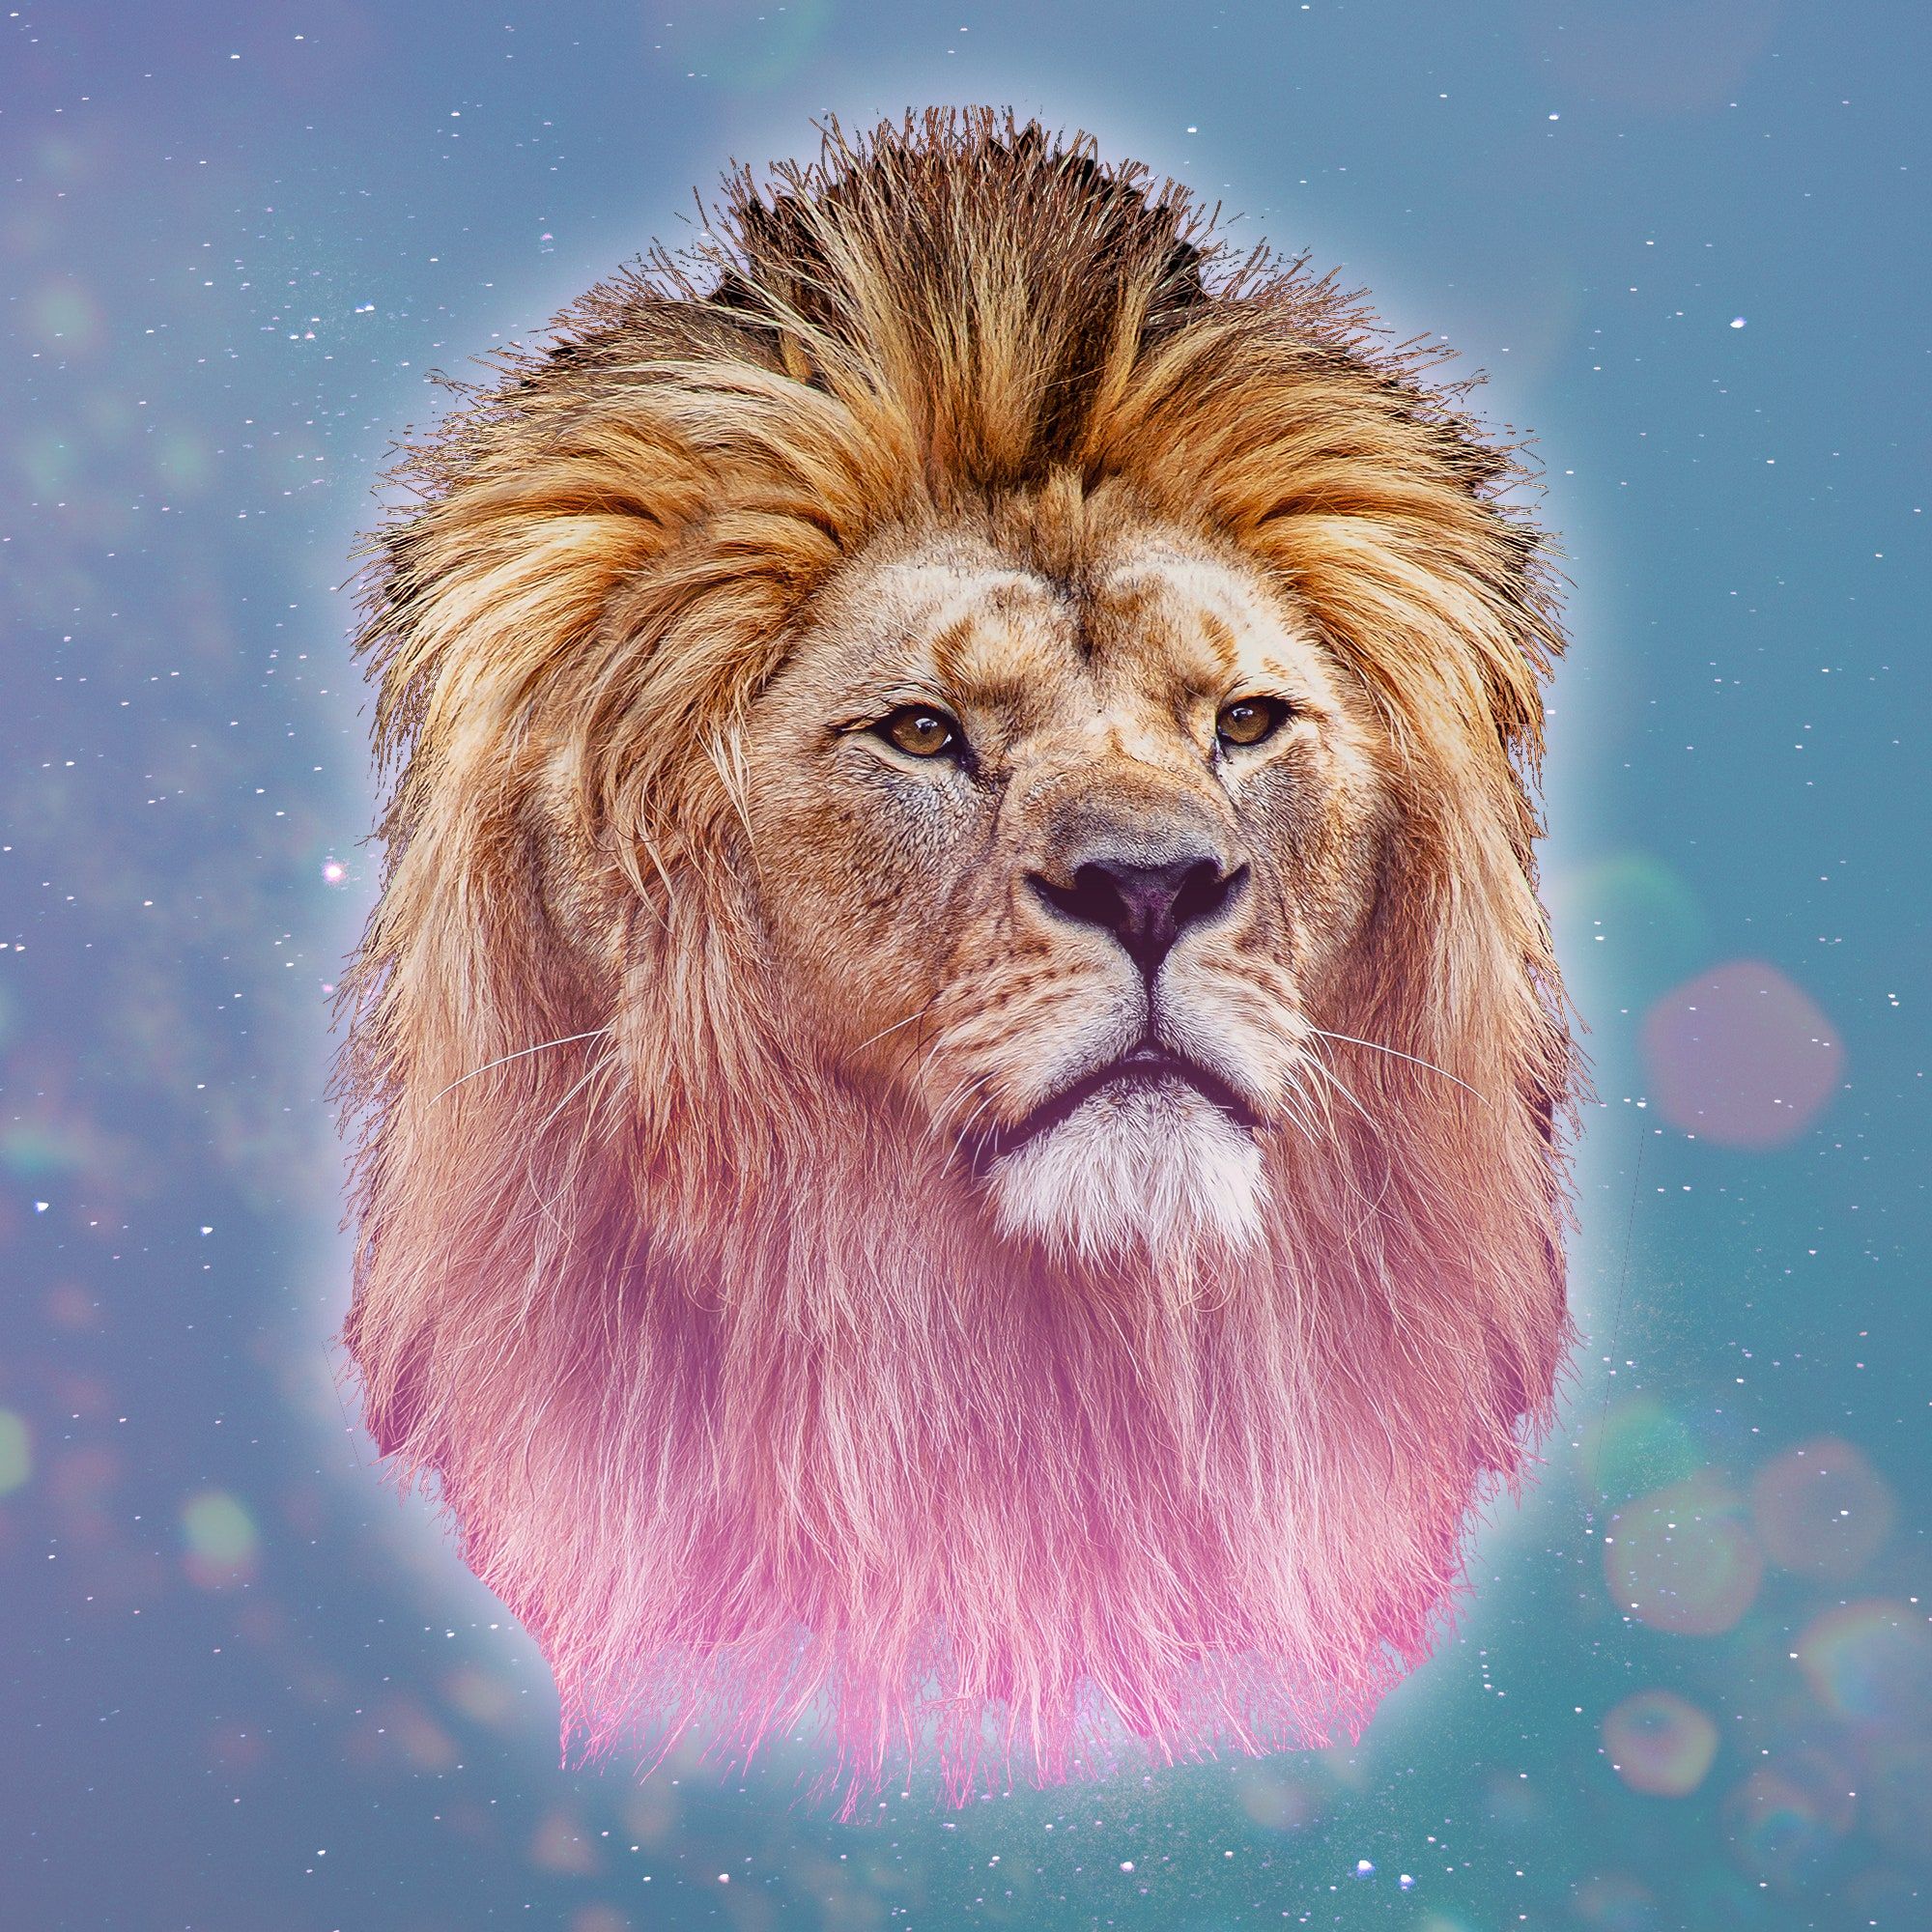 A lion with pink hair and blue background - Lion